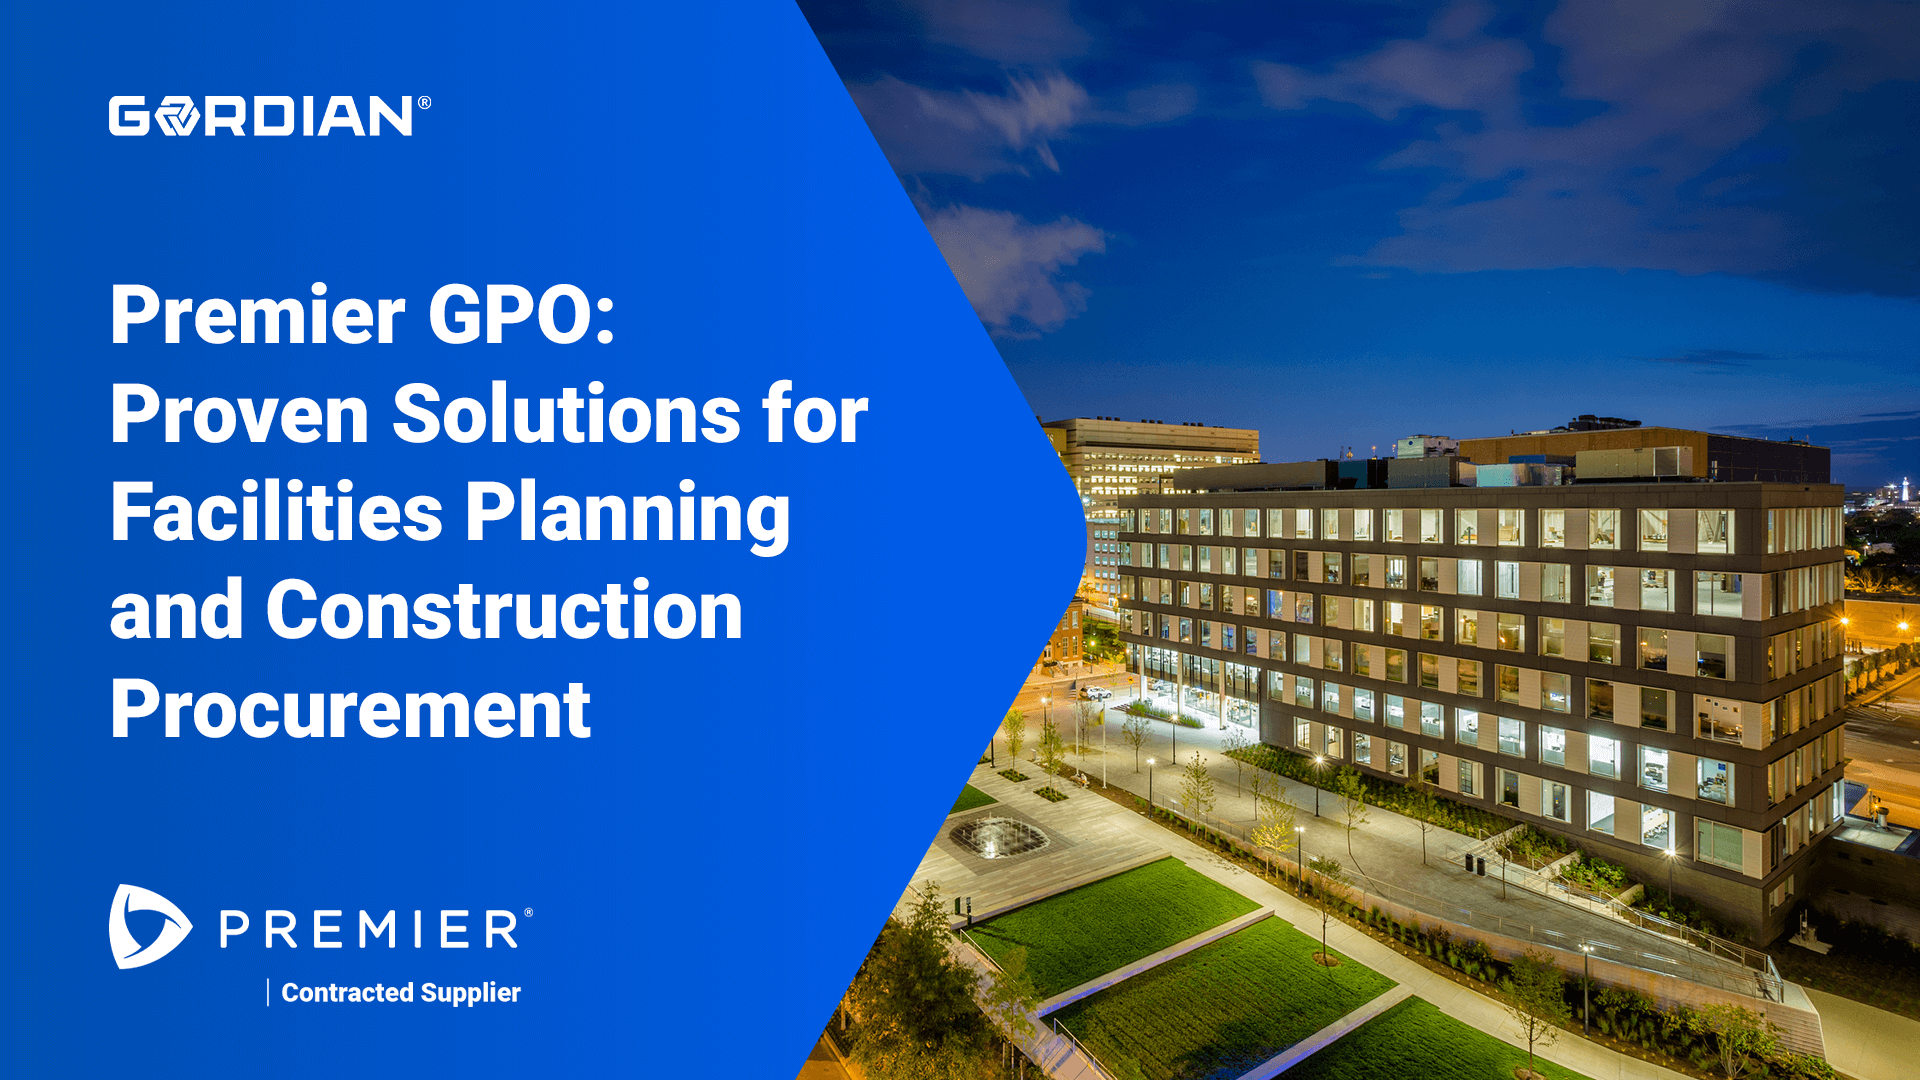 Premier GPO and Gordian: Proven Solutions for Facilities Planning and Construction Procurement 2